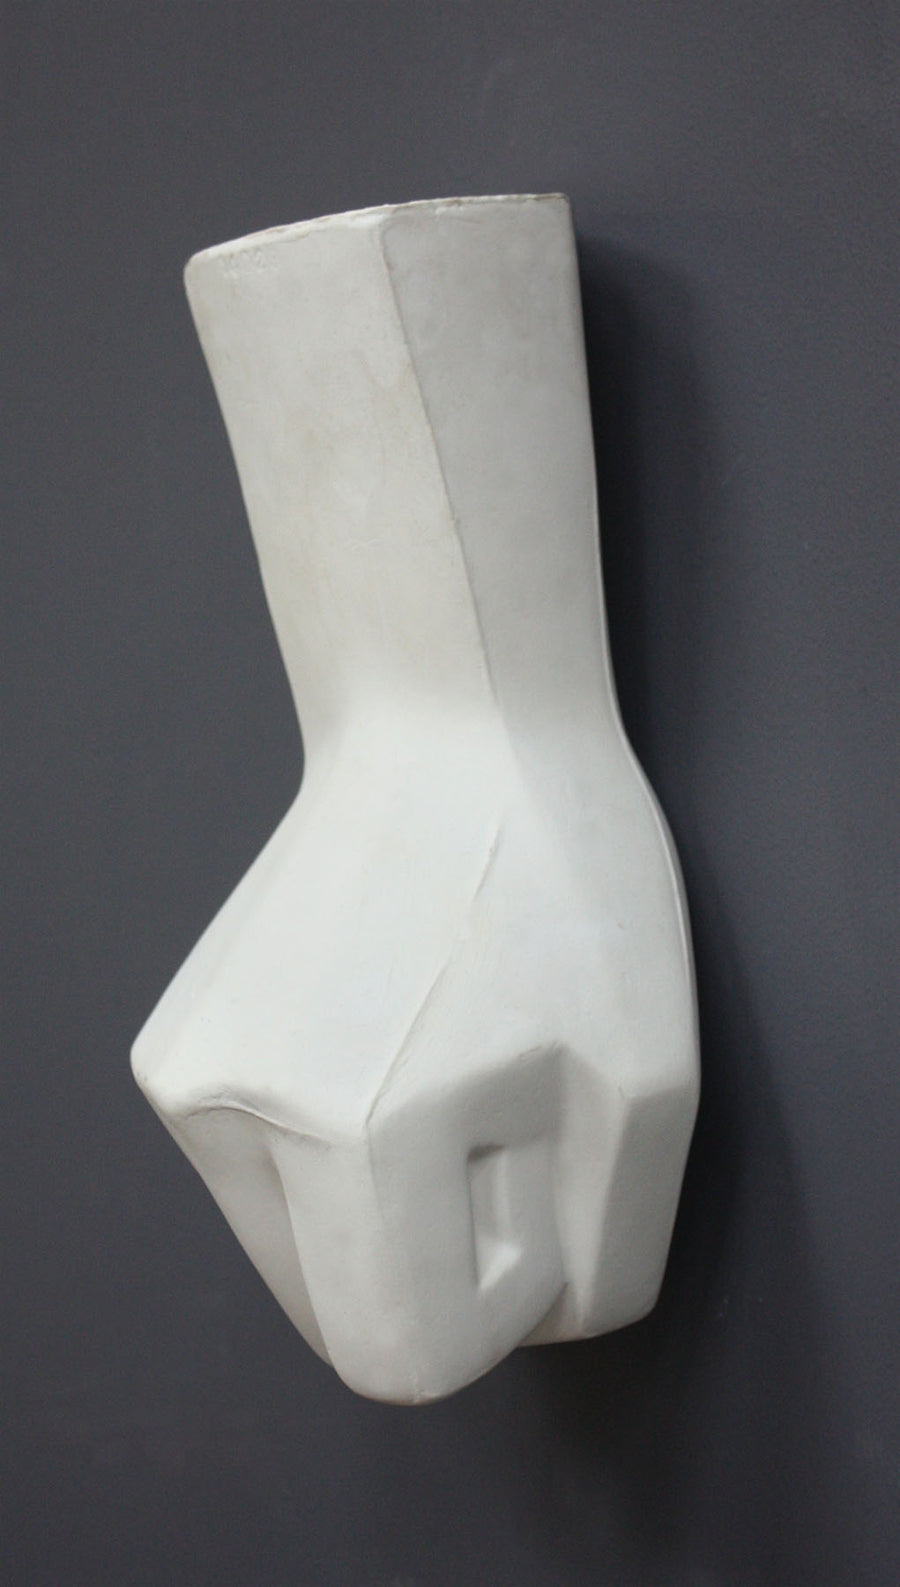 photo of white plaster cast sculpture of hand in fist in block forms against gray background